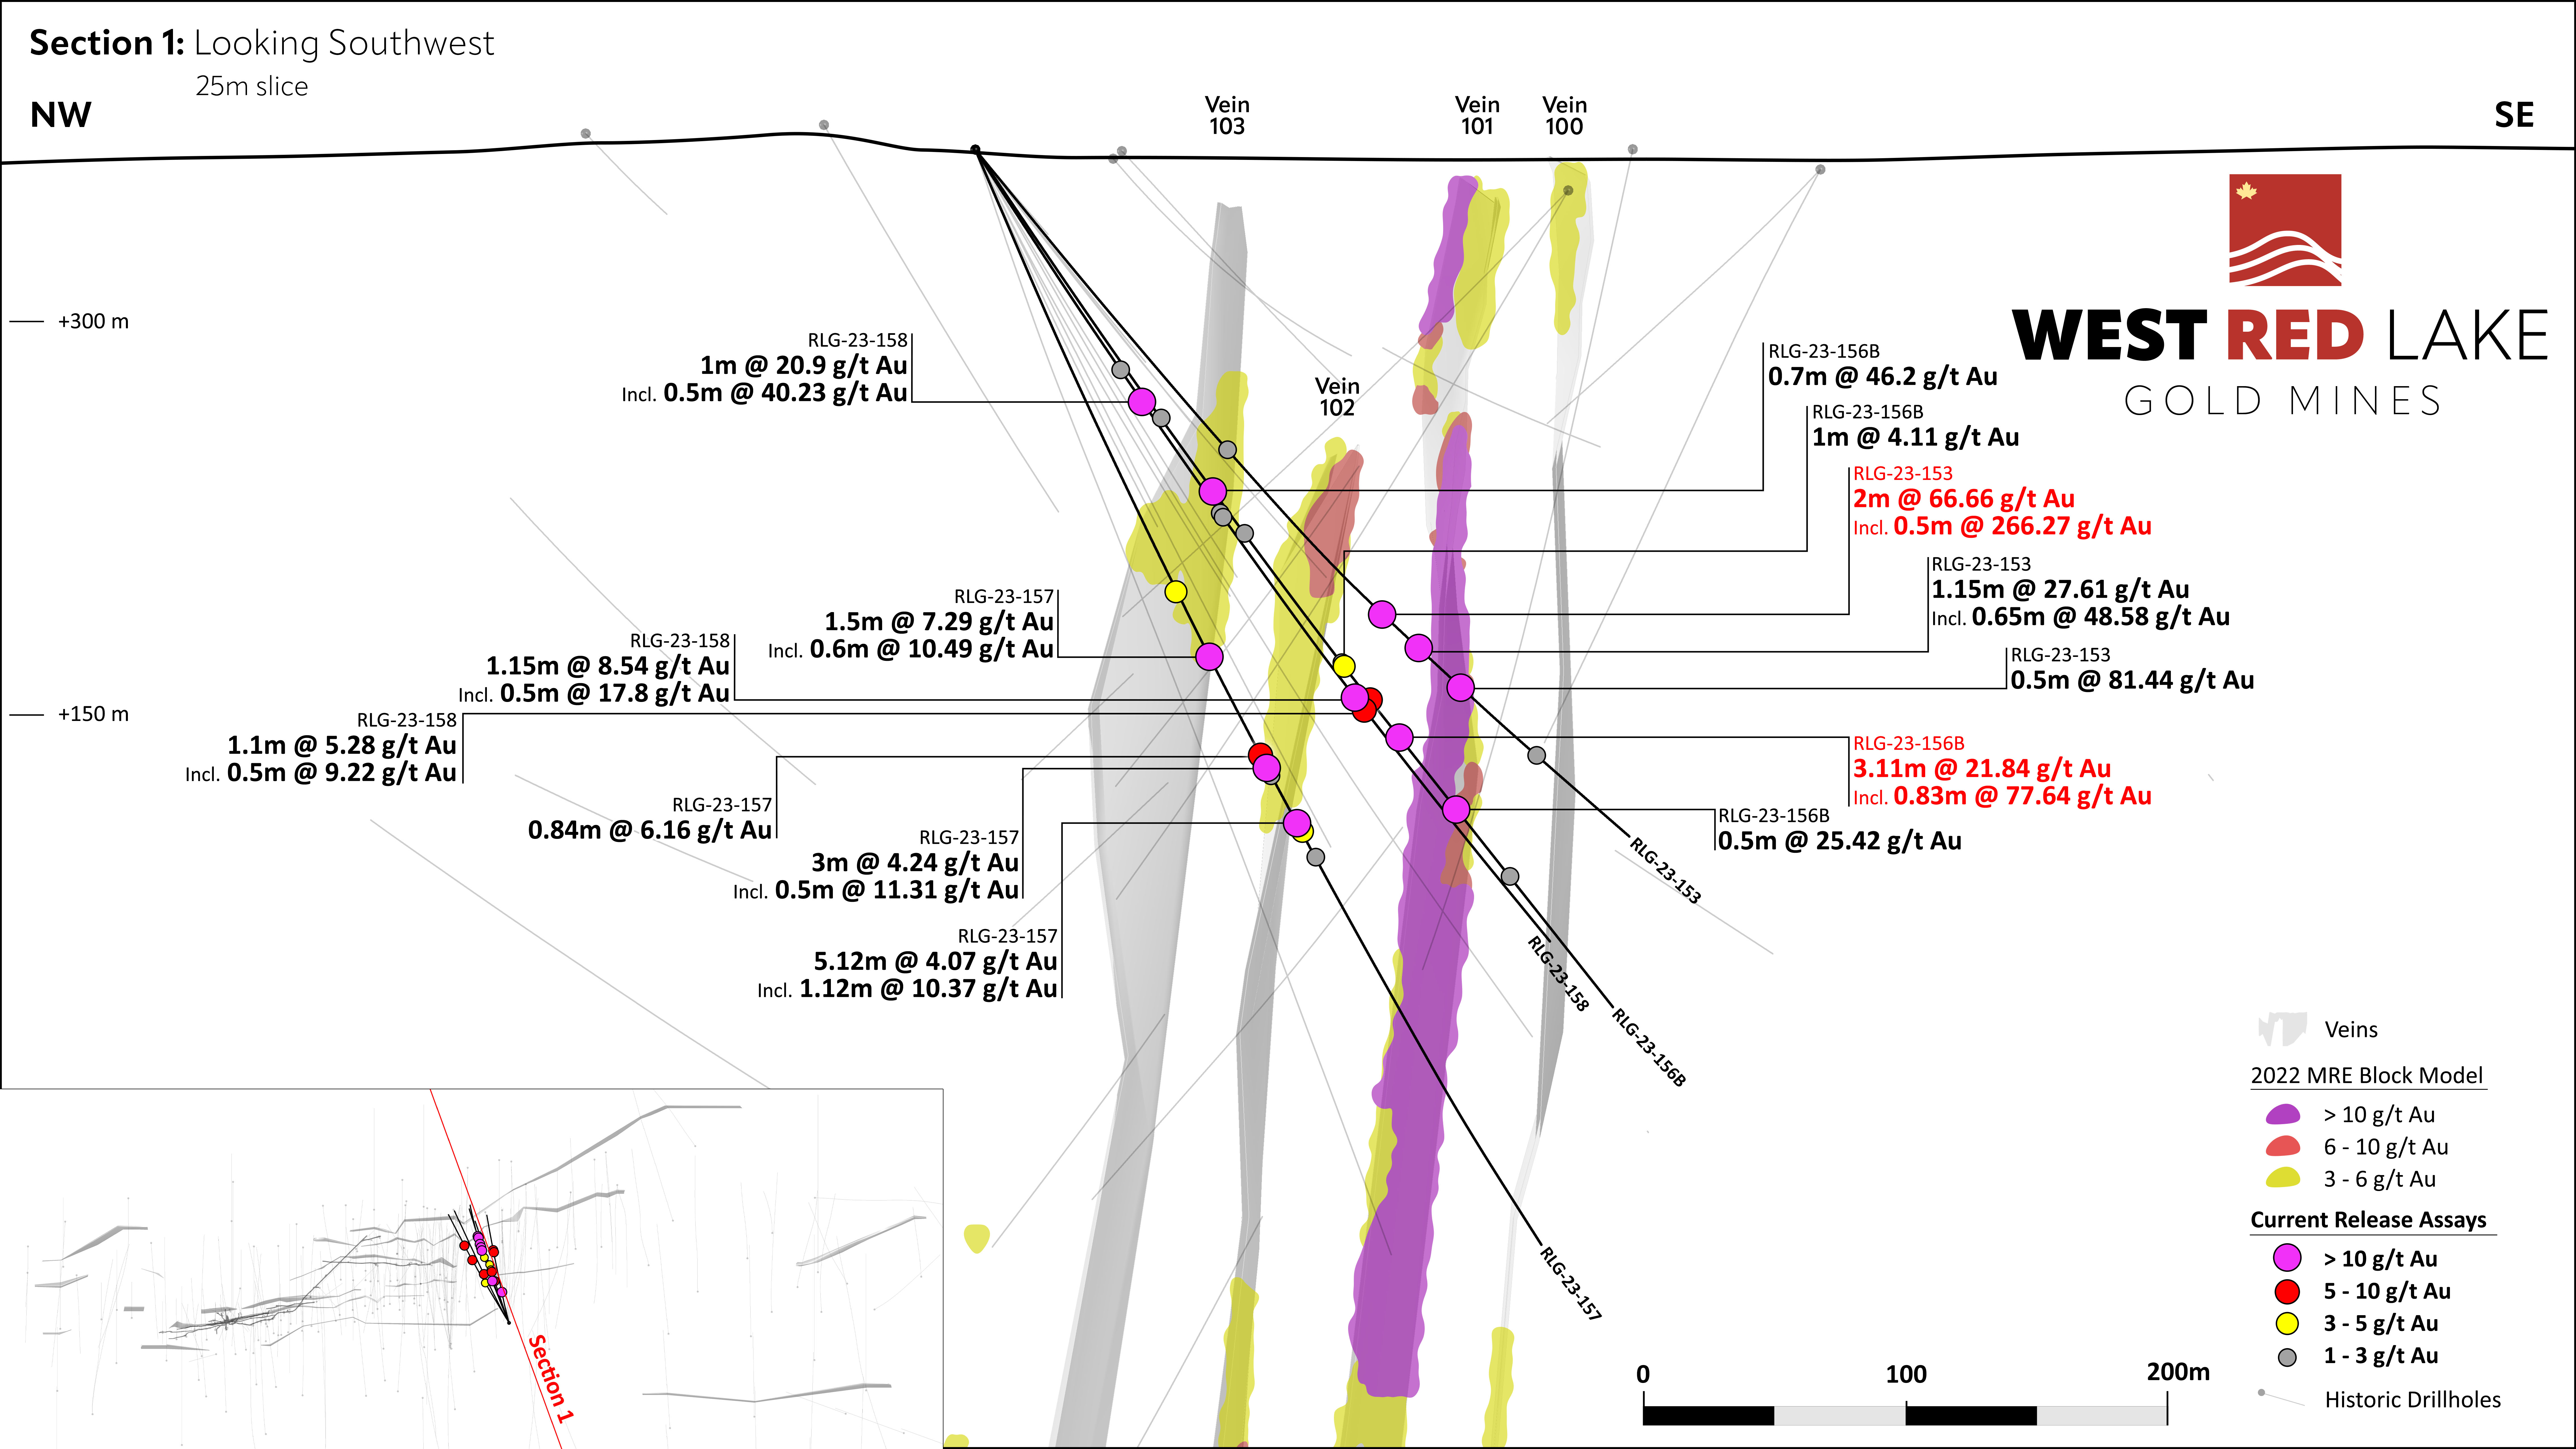 Figure 2. Rowan Mine Drill Section 1-Looing Southwest-WRLG_Section1